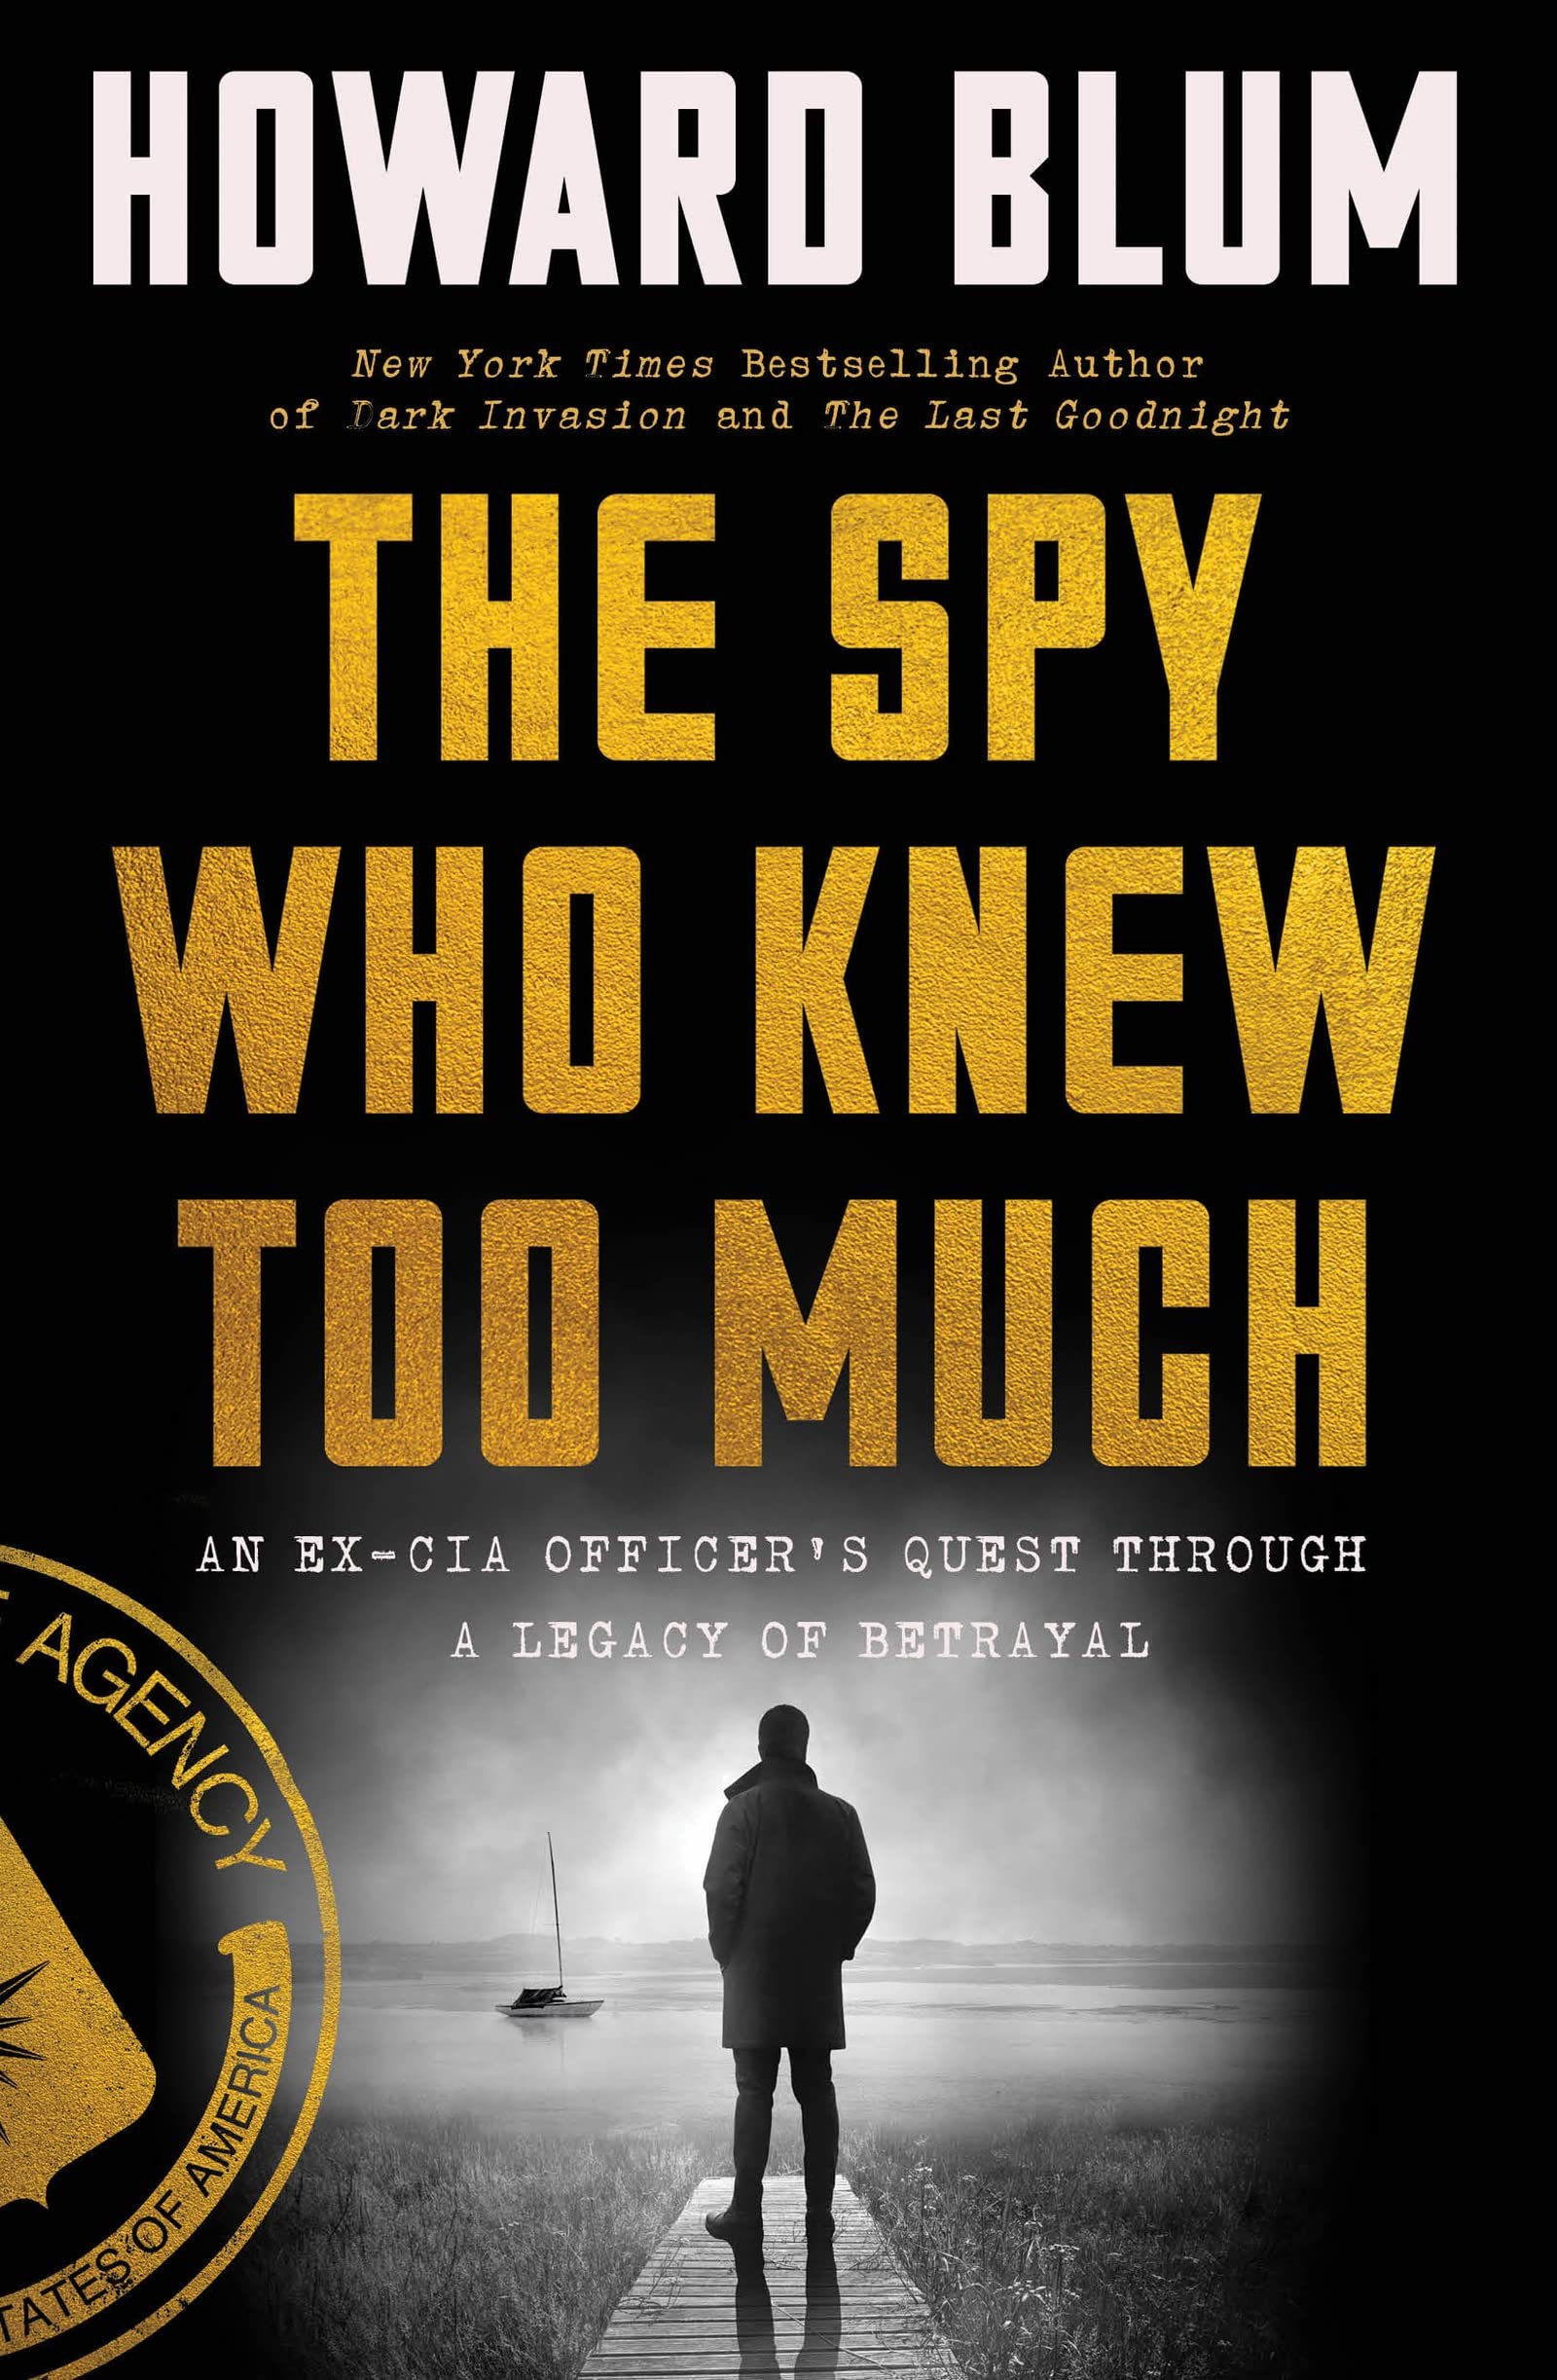 Obsession and Betrayal: A Review of ‘The Spy Who Knew Too Much’